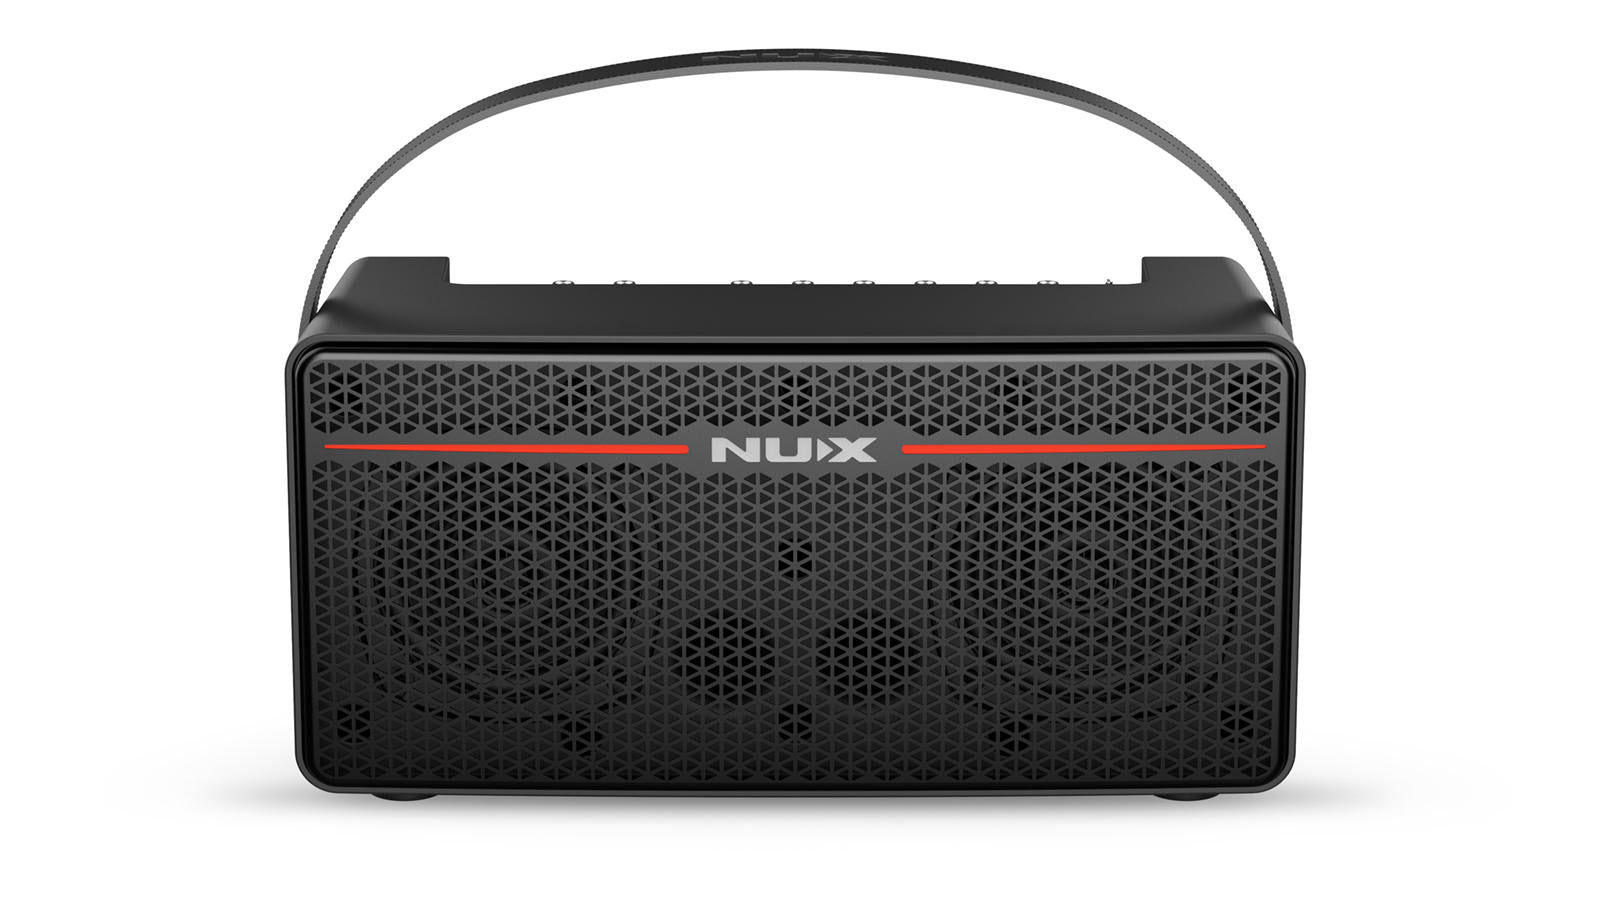 NUX Mighty Space Wireless Stereo Amplifier